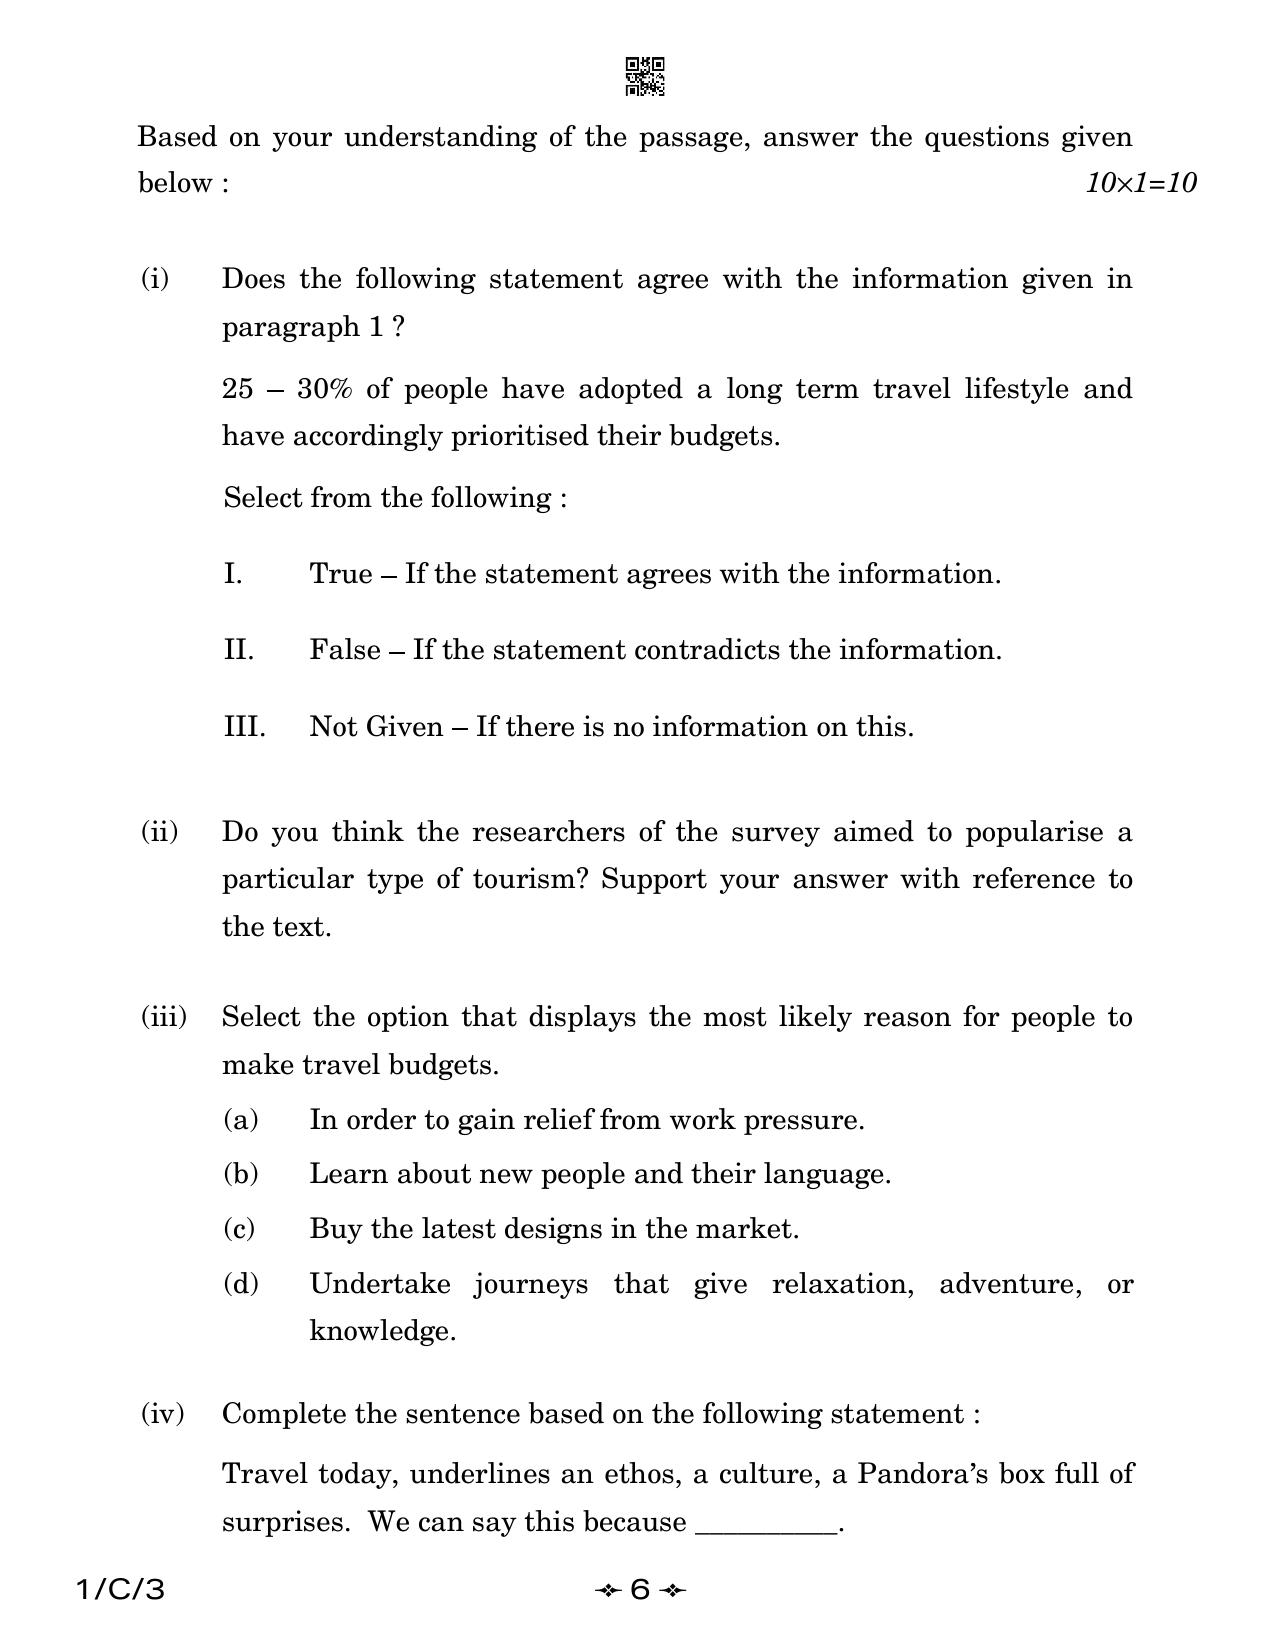 CBSE Class 12 1-3 English Core 2023 (Compartment) Question Paper - Page 6